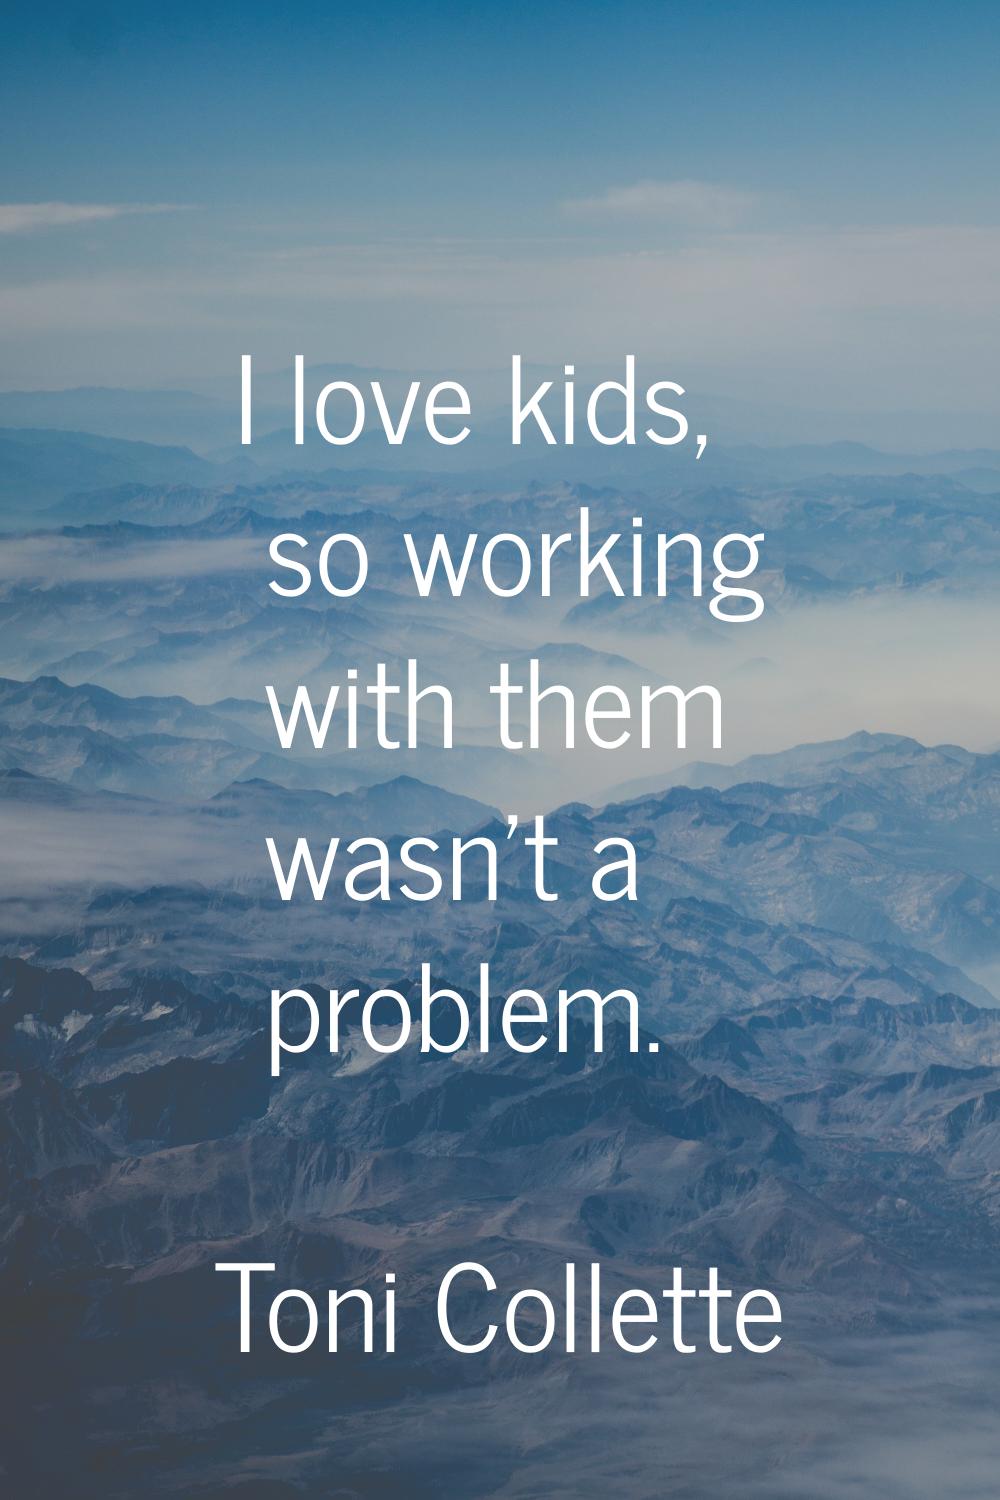 I love kids, so working with them wasn't a problem.